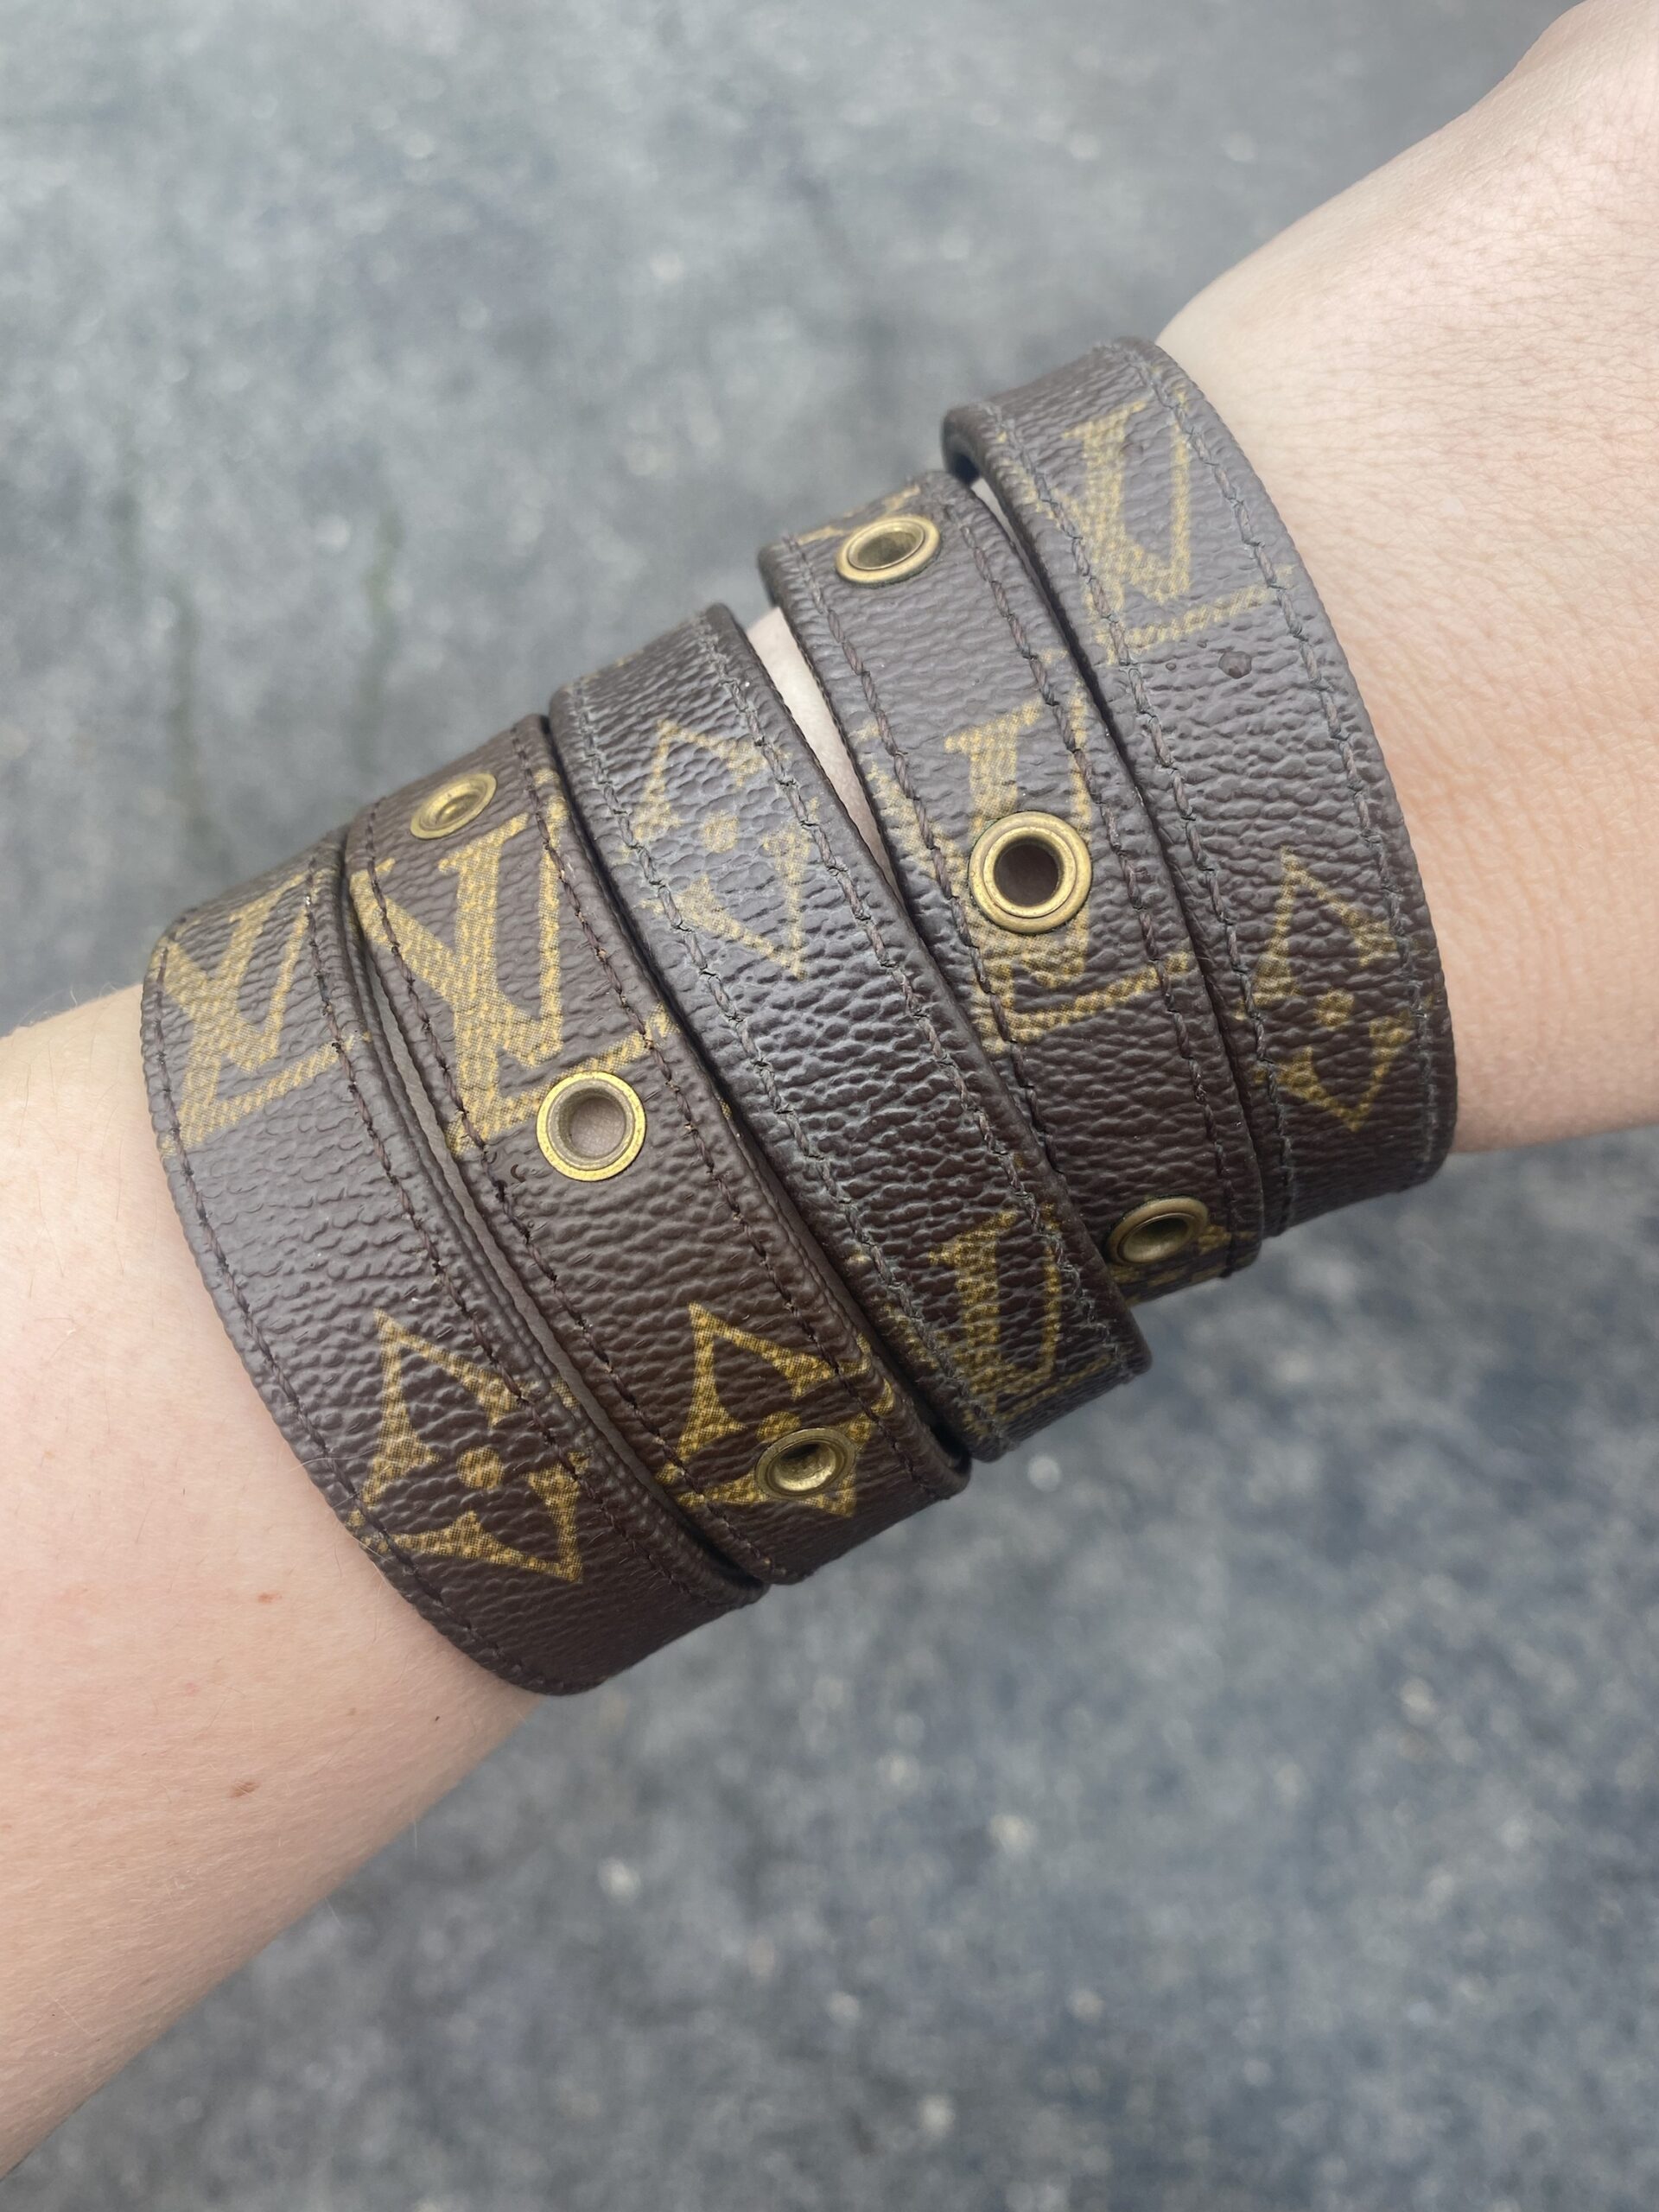 Authentic Upcycled Cuff Bracelets • So Beautifully Broken